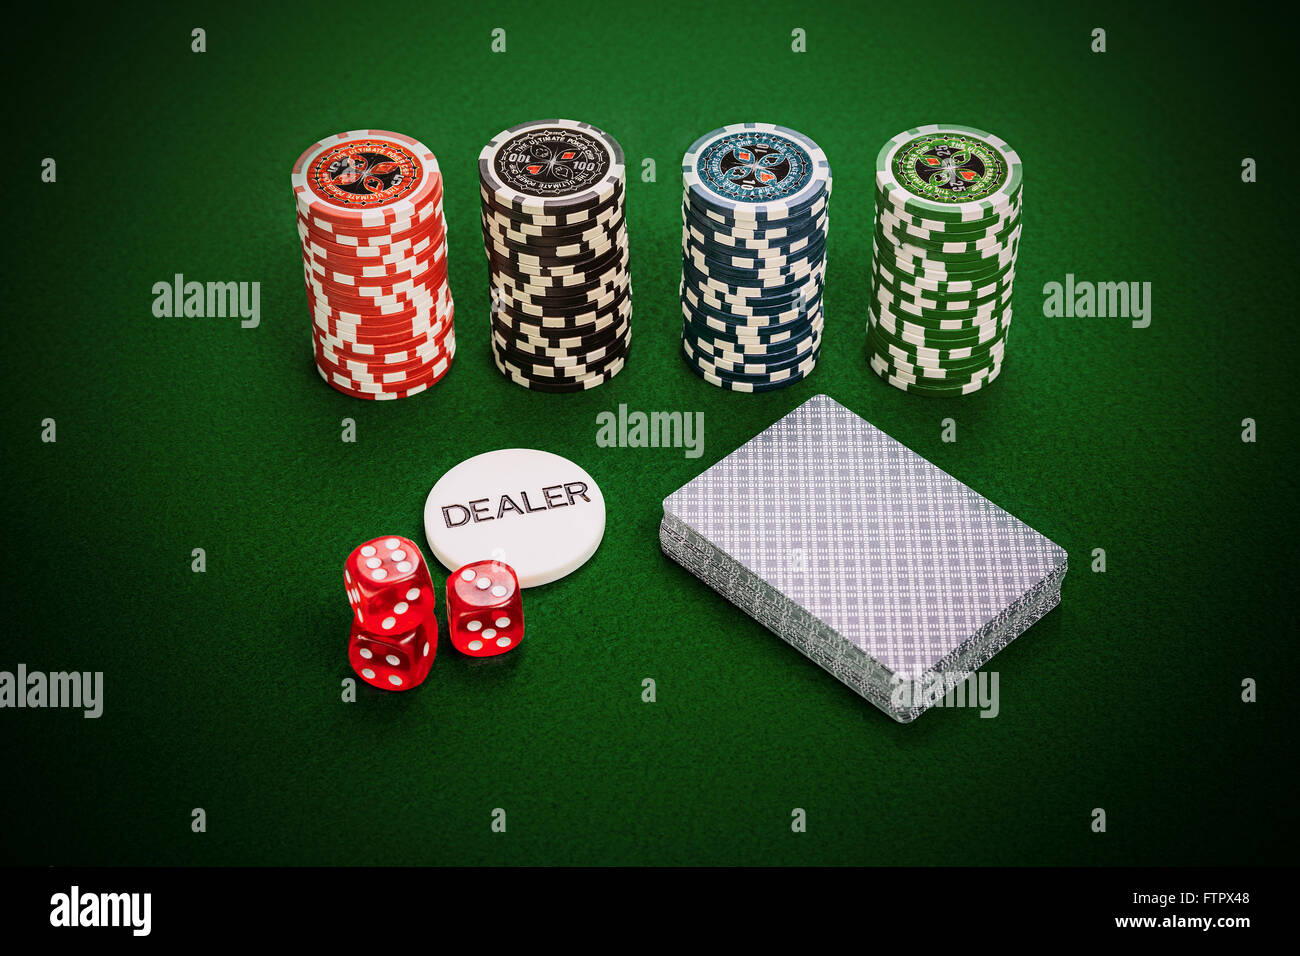 Casino chips, deck of cards, dealer chip and red casino dices lying on green casino table. Stock Photo